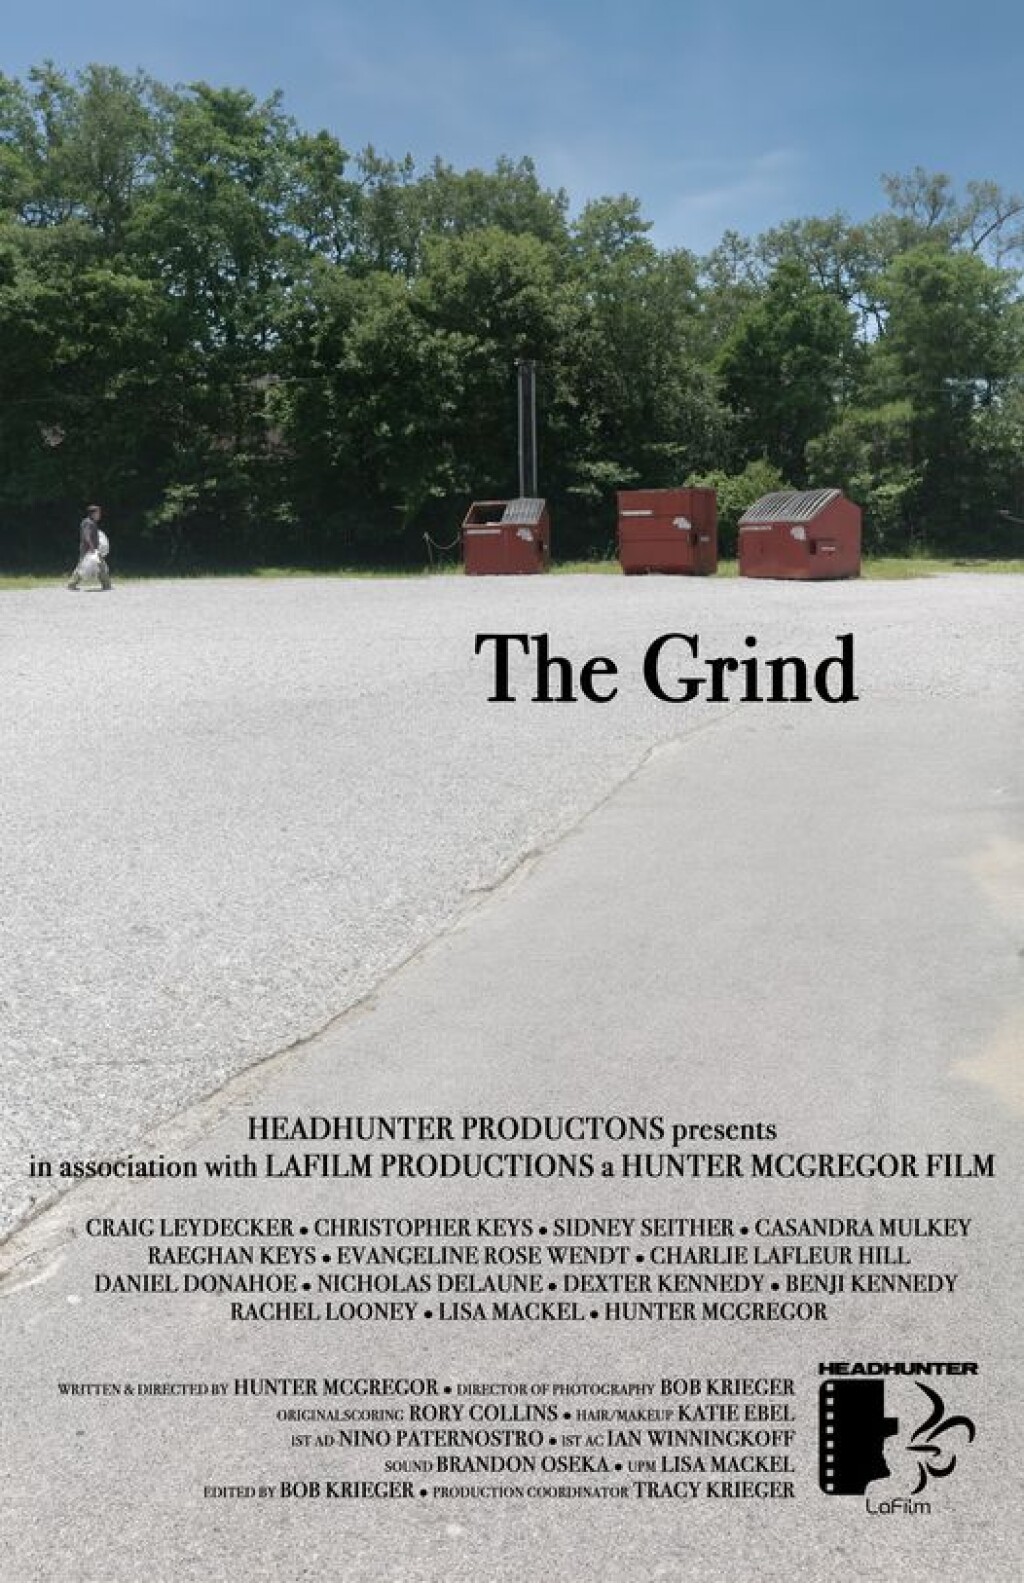 Filmposter for The Grind